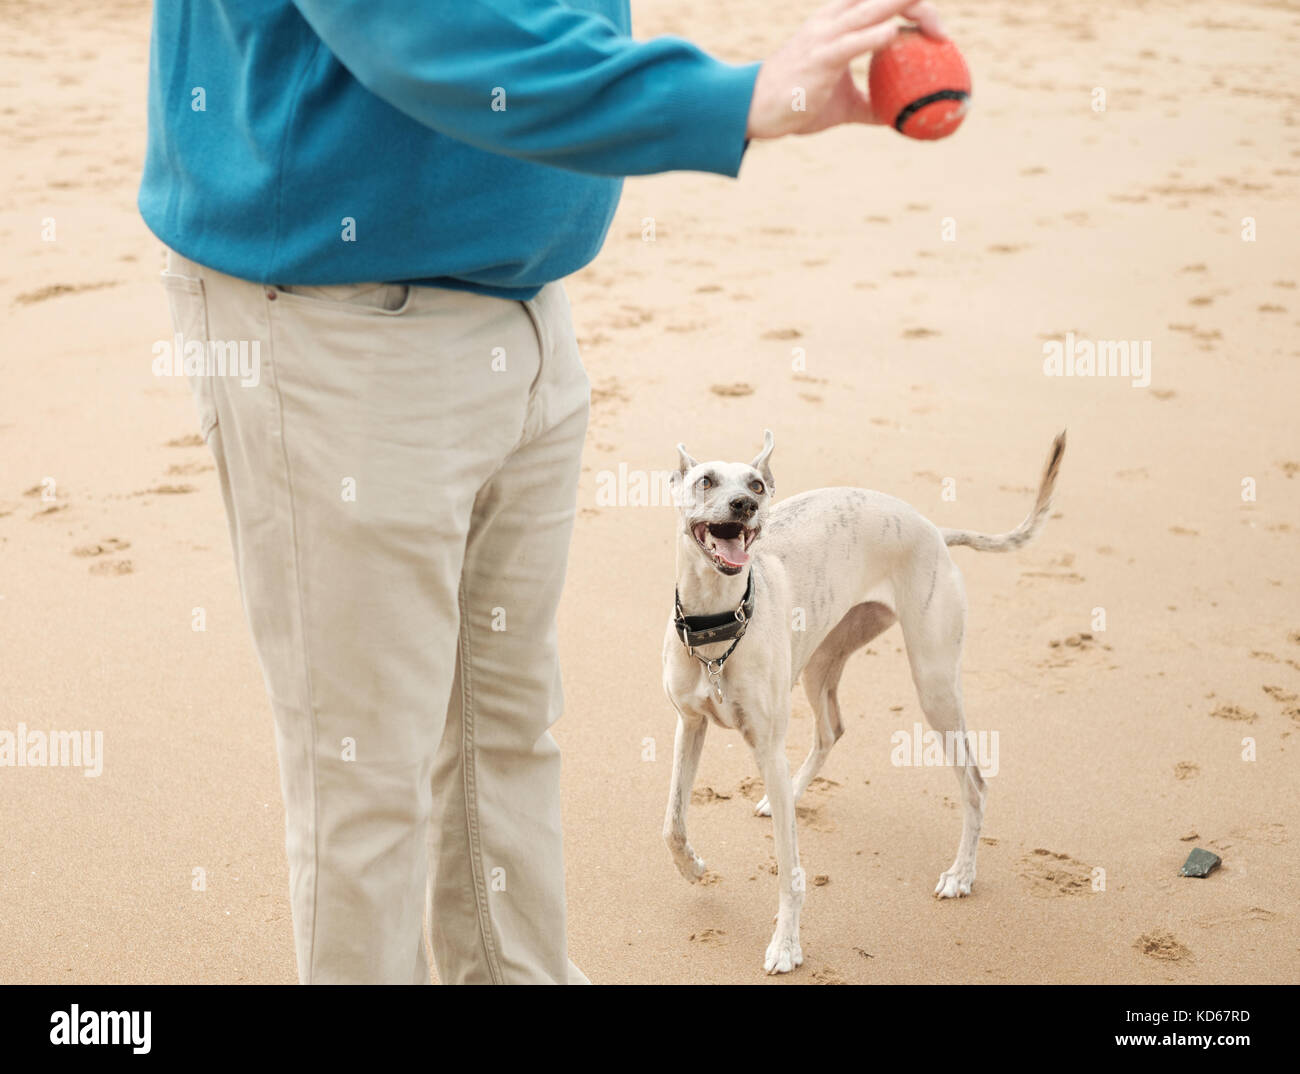 Man throwing ball for whippet dog on beach in Margate, Kent, UK Stock Photo